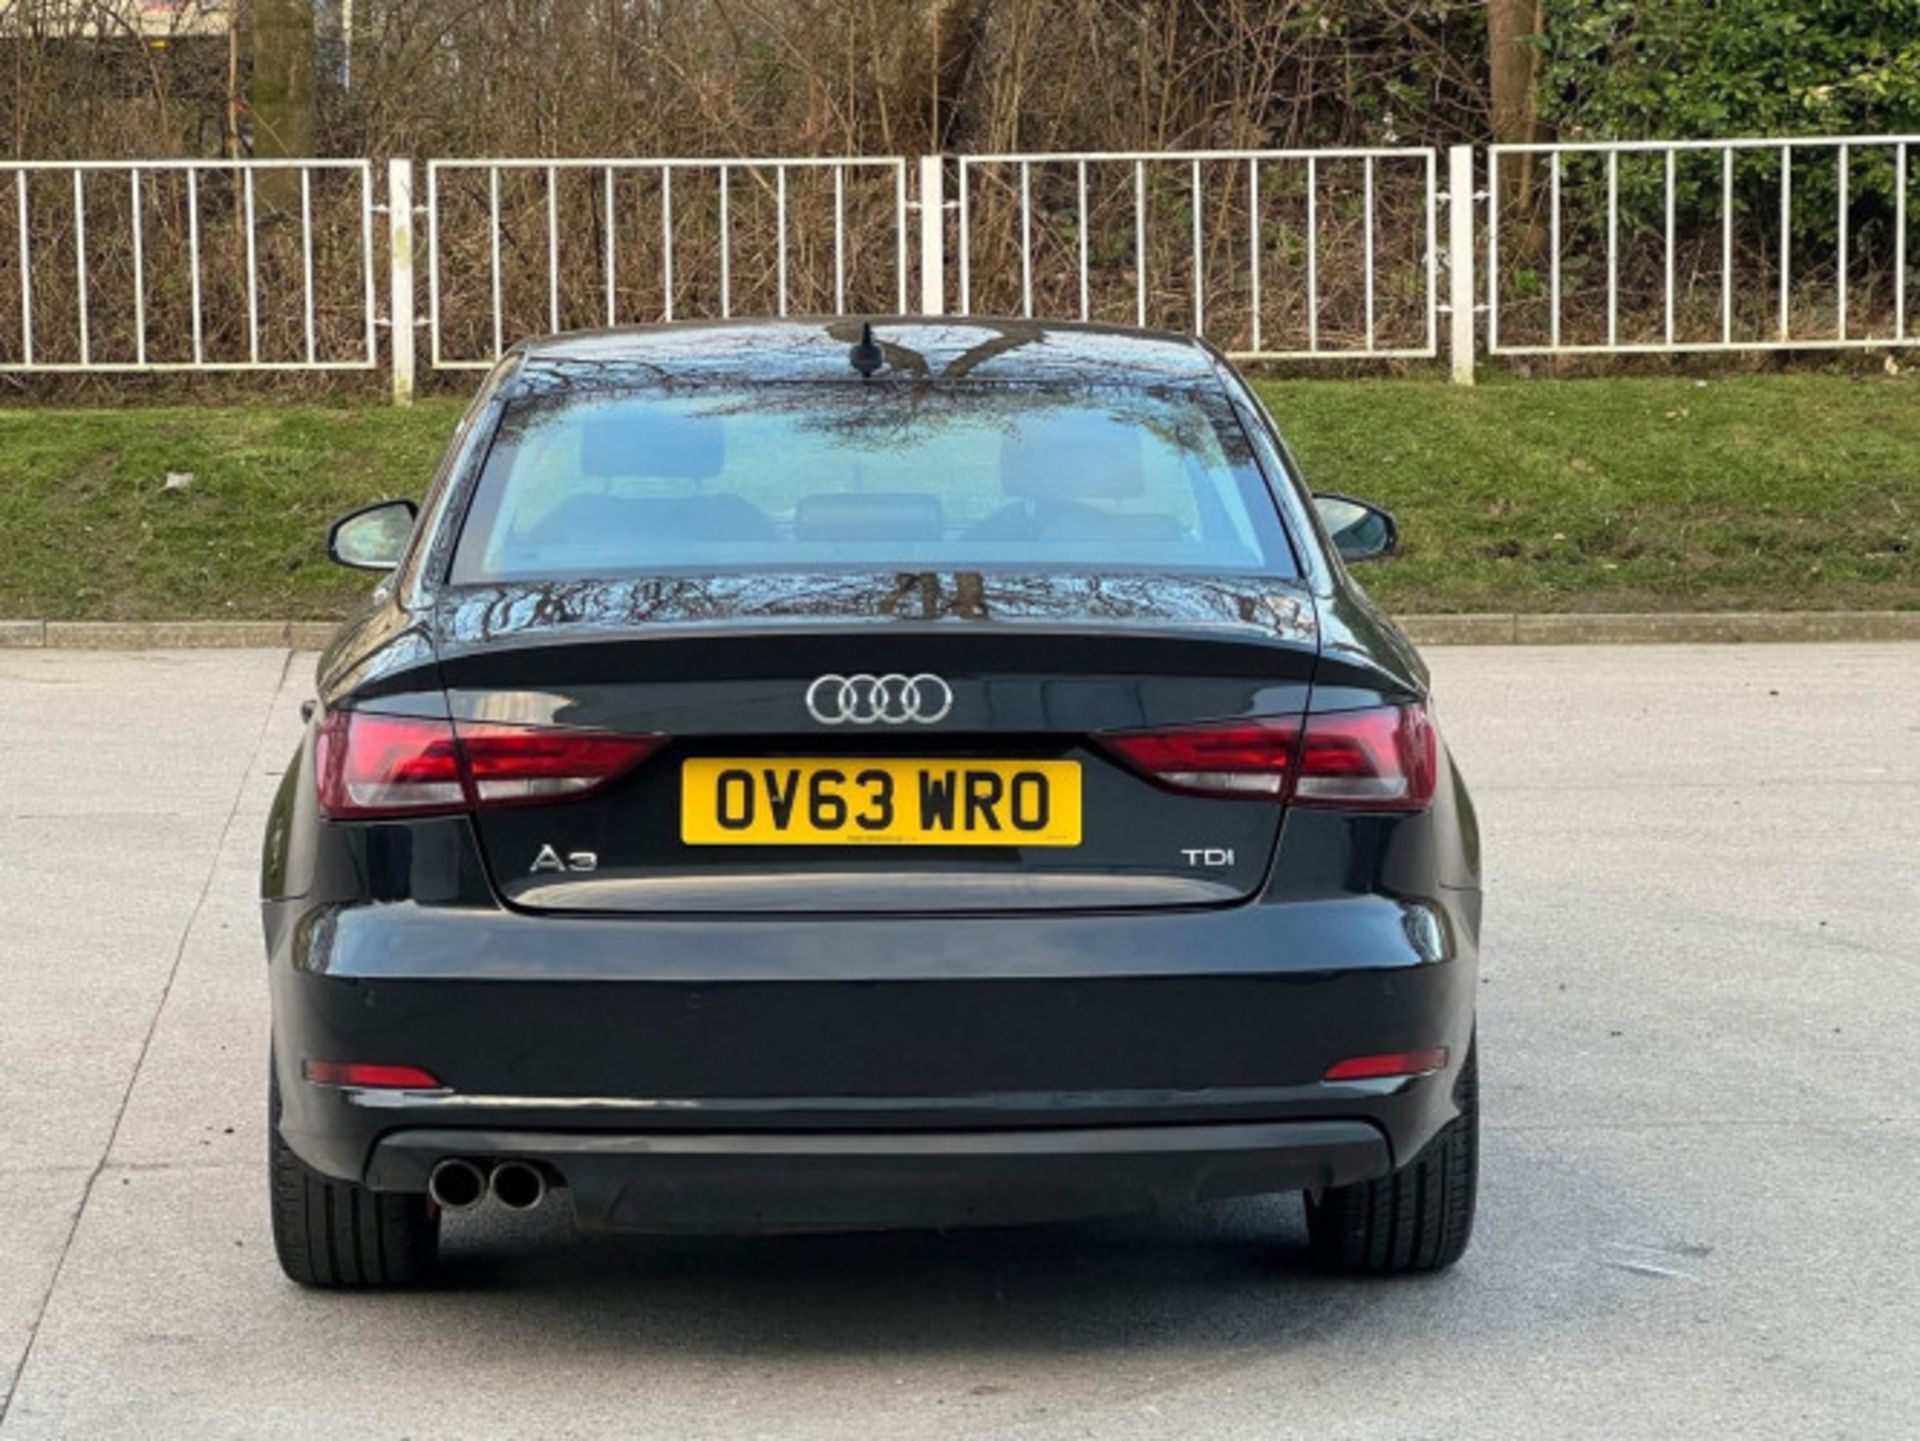 AUDI A3 2.0TDI SPORTBACK - STYLE, PERFORMANCE, AND COMFORT COMBINED >>--NO VAT ON HAMMER--<< - Image 207 of 216